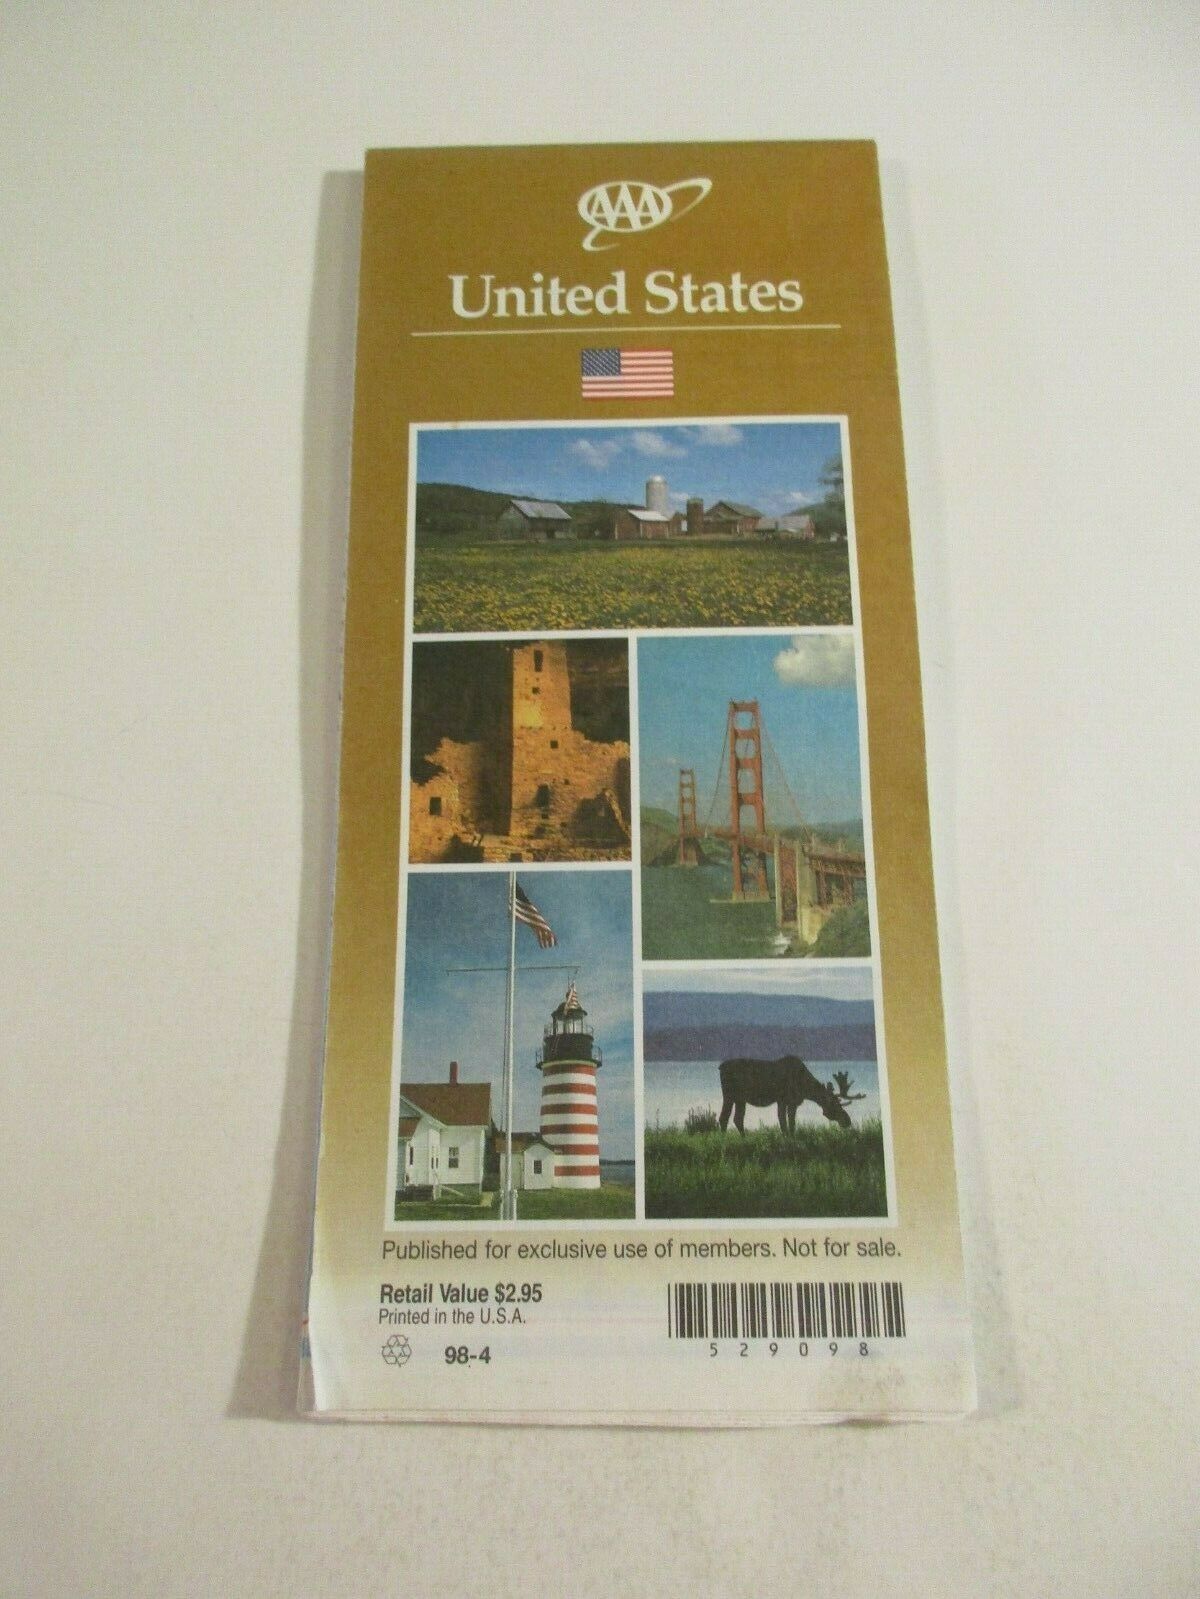 1998 Aaa United States State Highway Travel Road Map-jz3